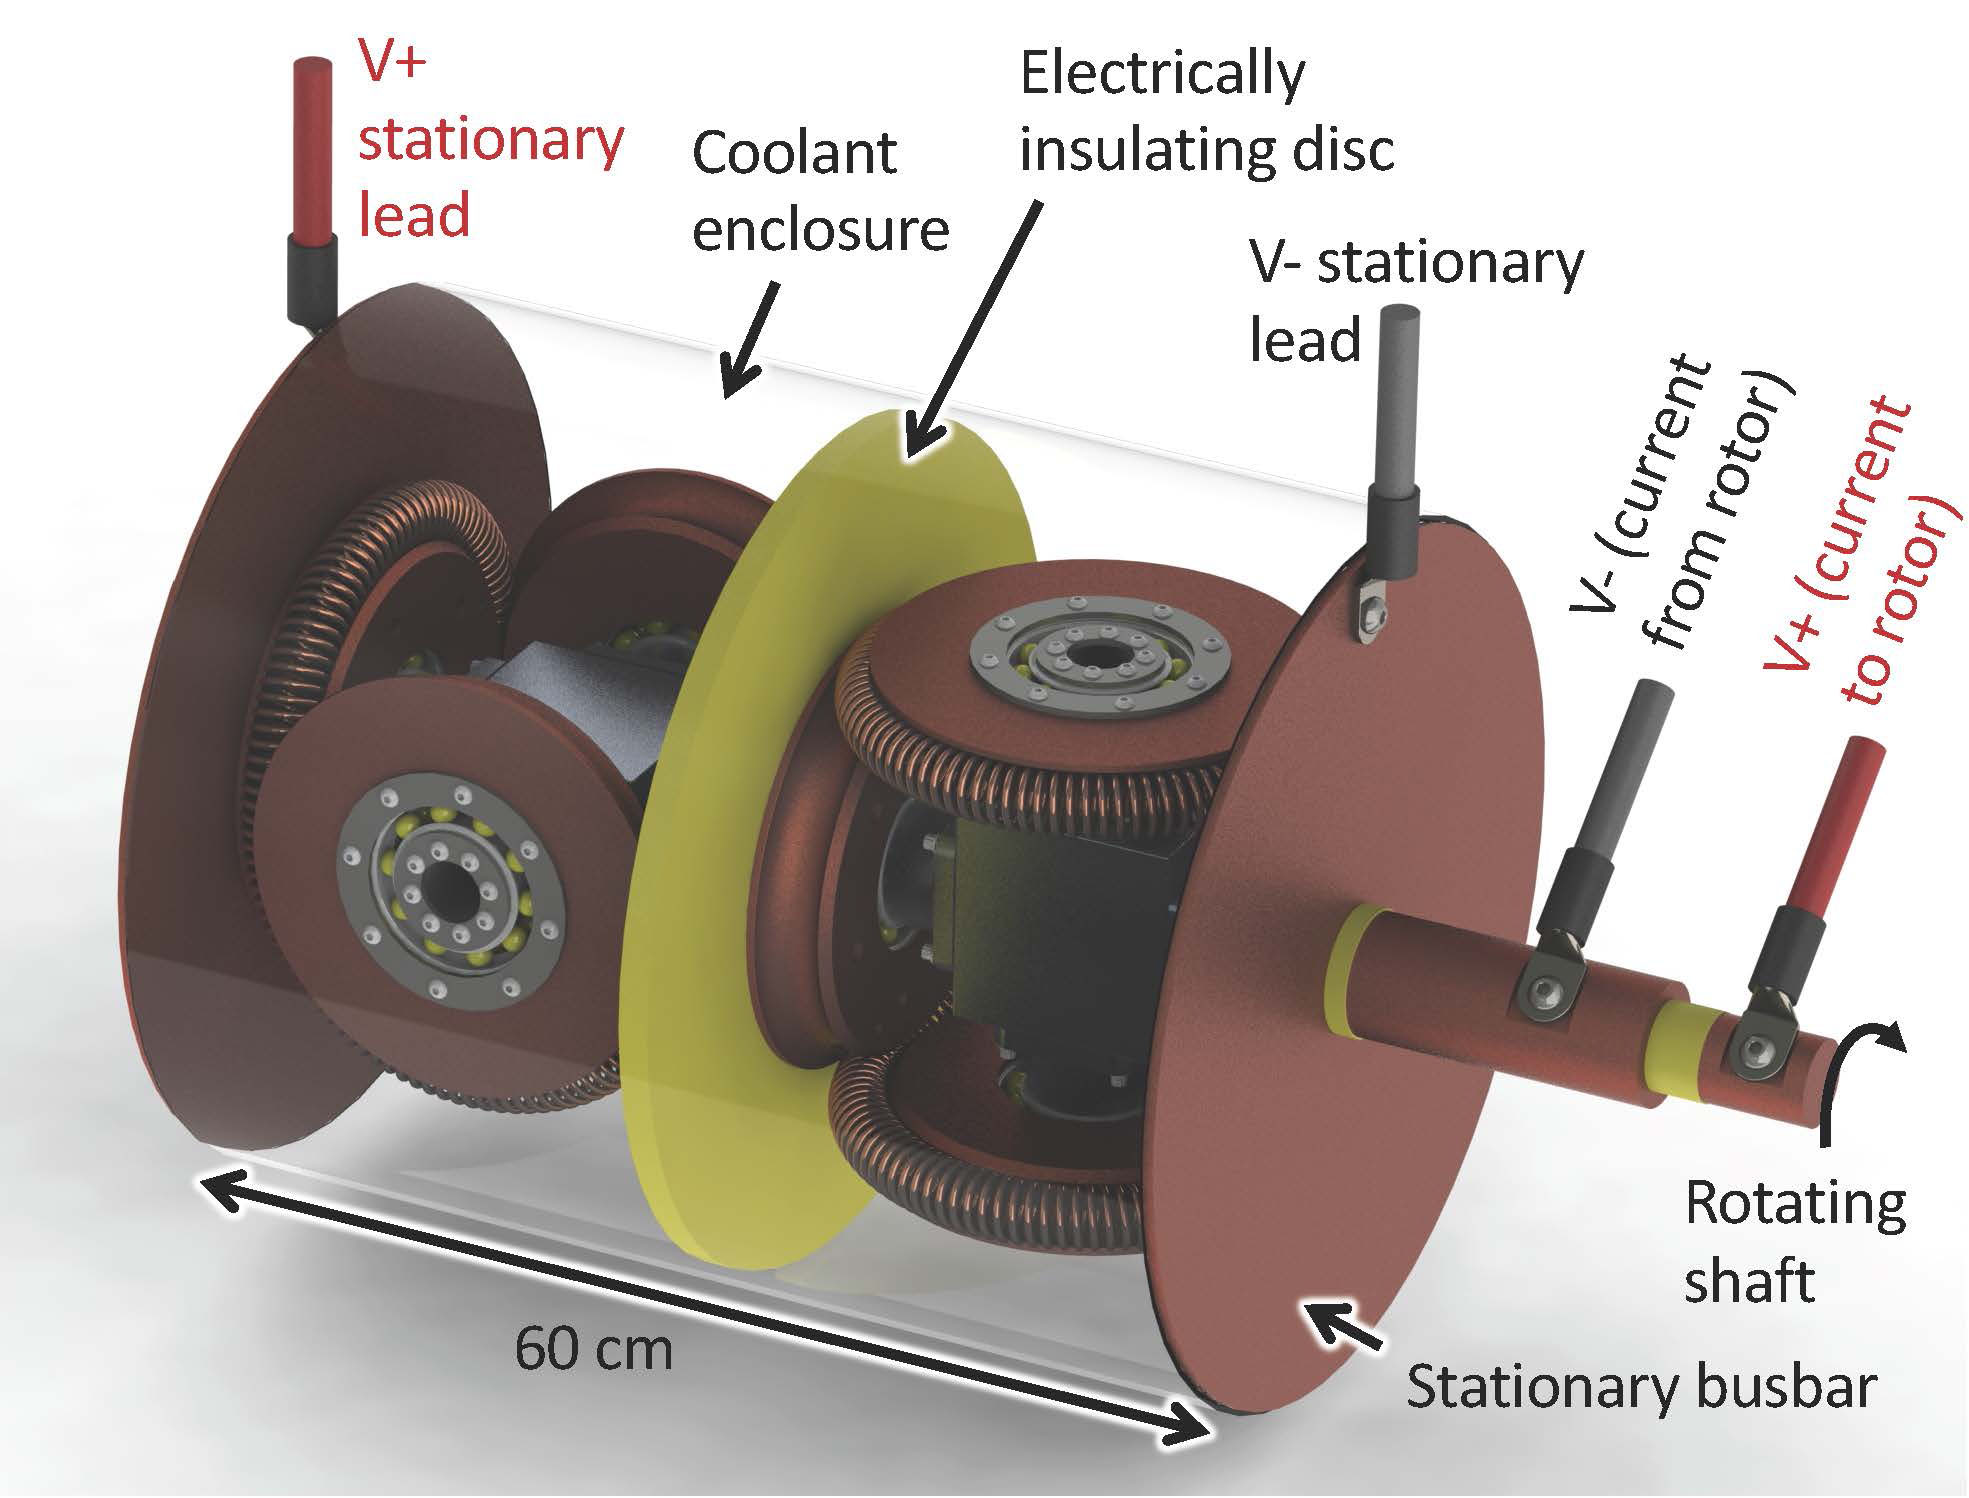 A two-channel Twistact device for a multimegawatt direct-drive wind turbine application